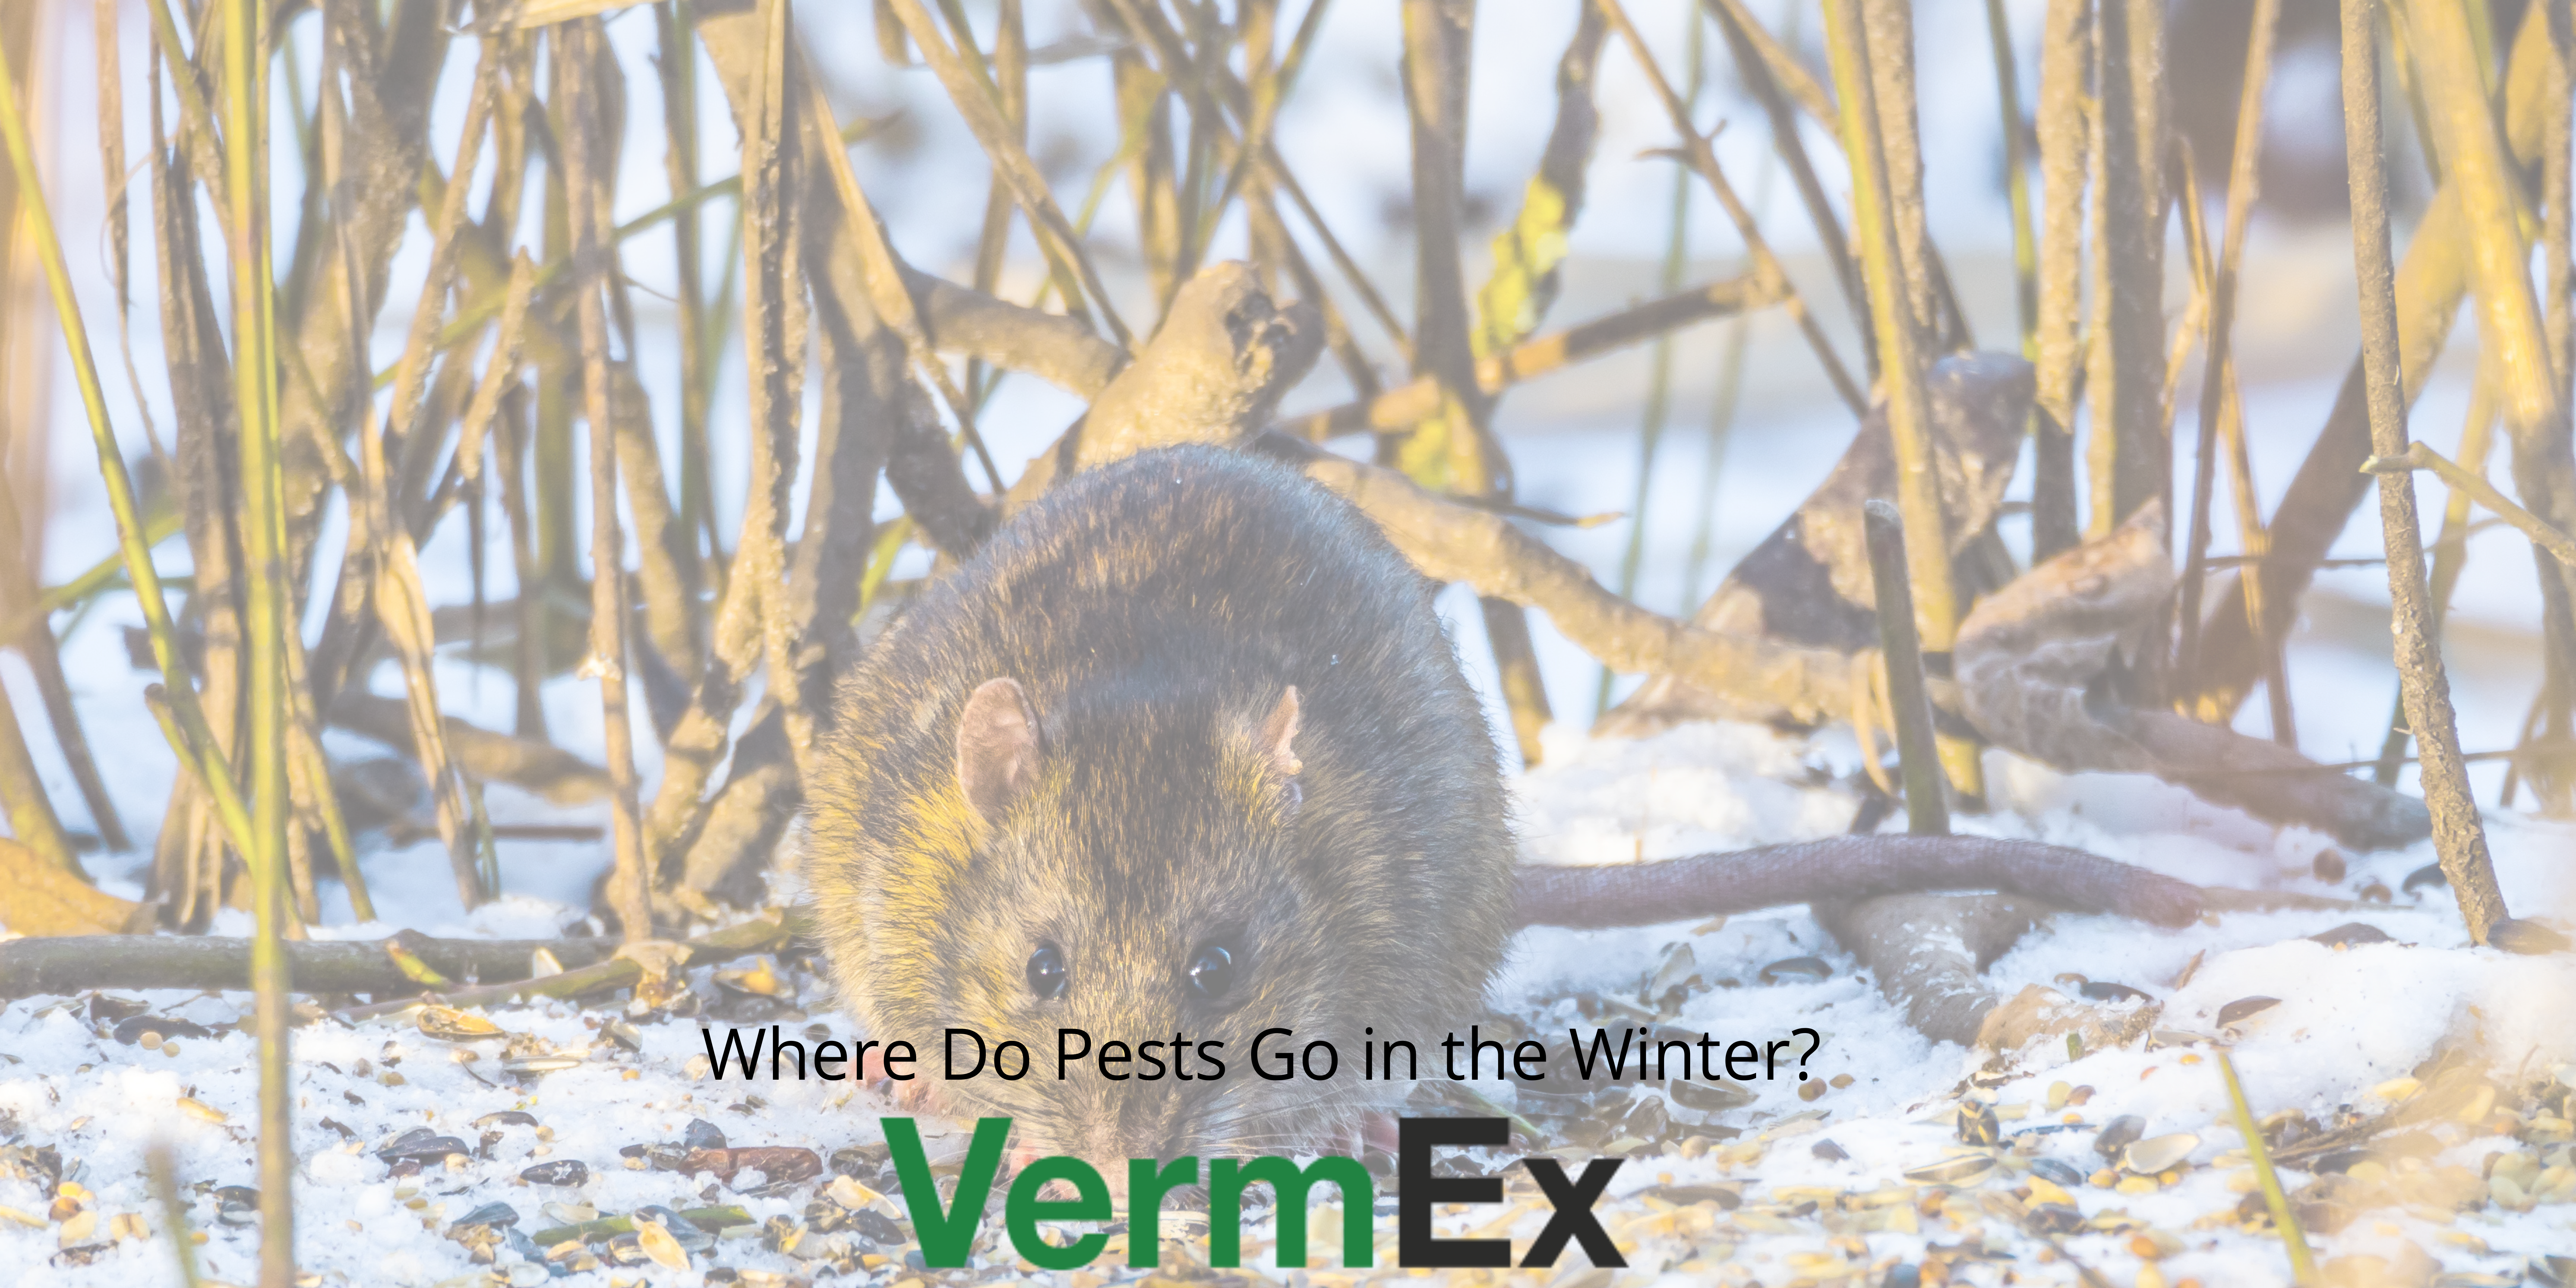 Where do pests go in the winter?